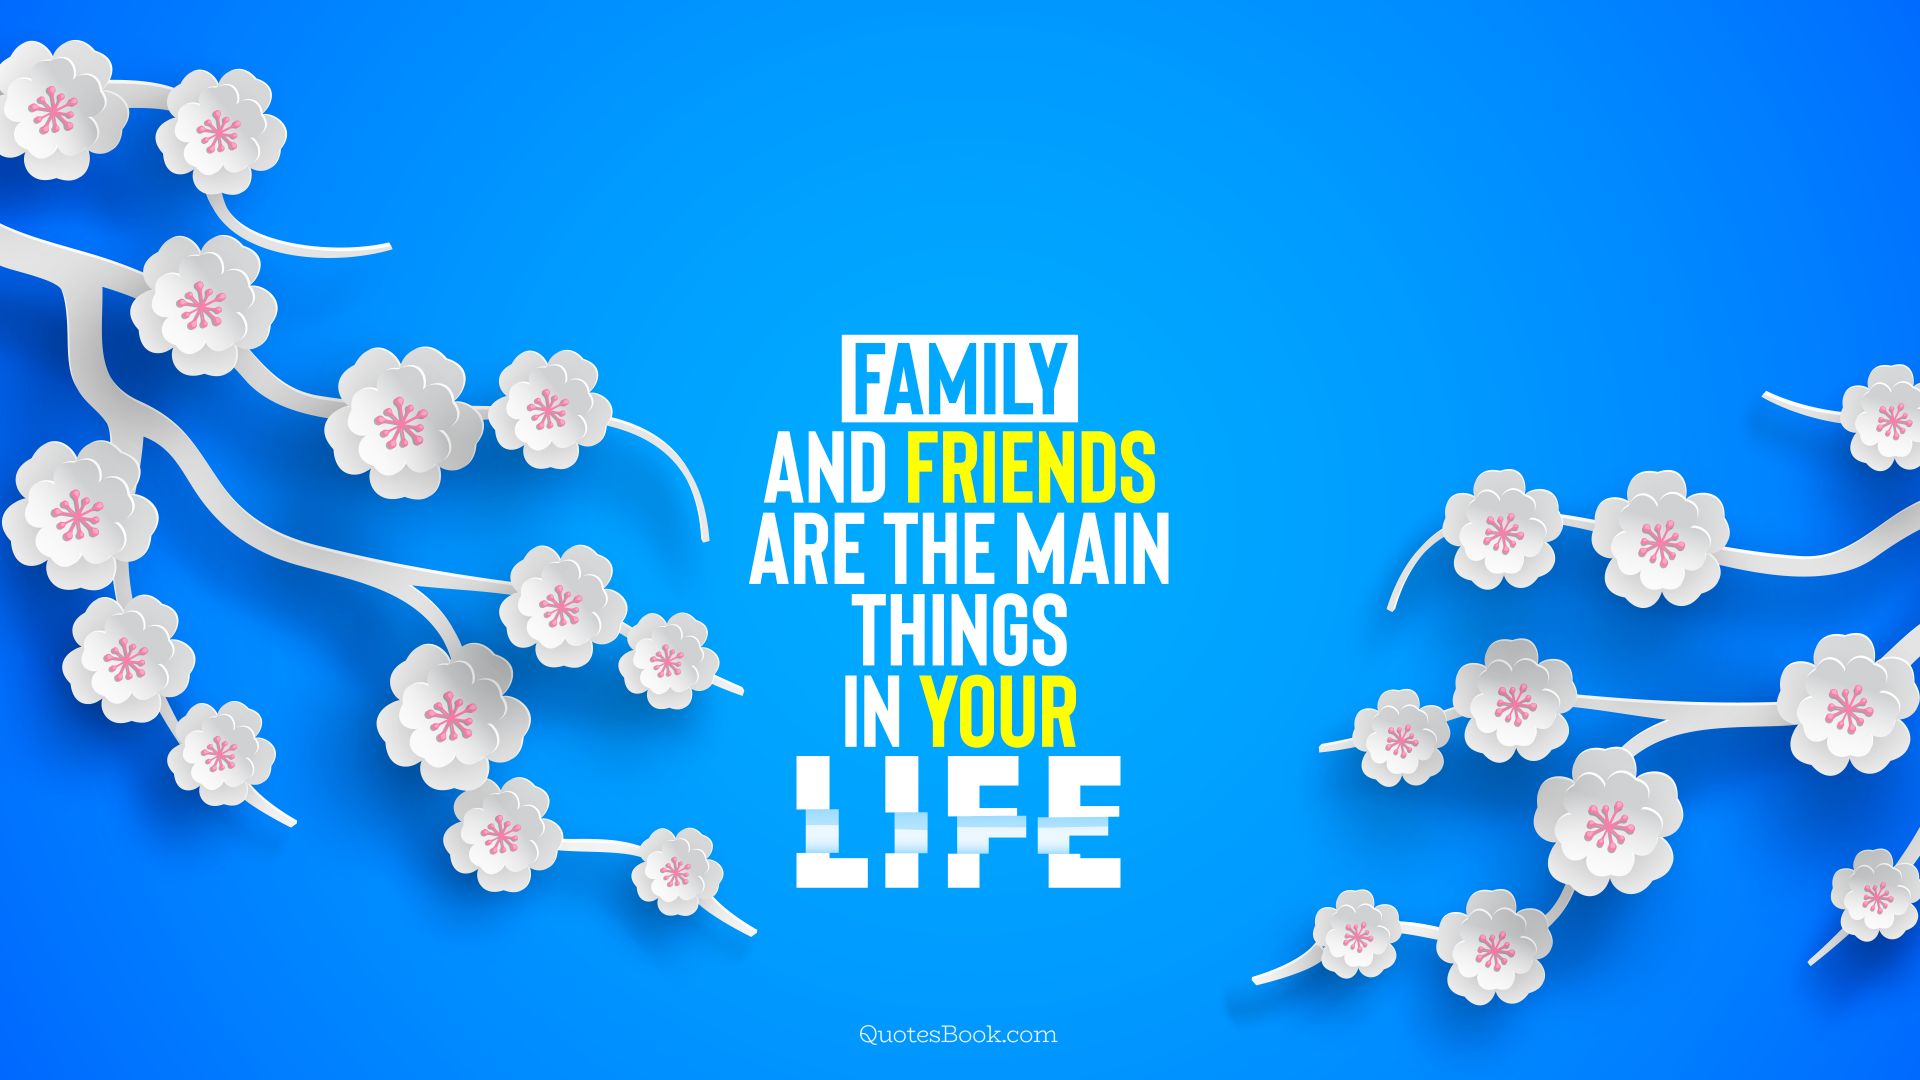 Family and friends are the main things in life